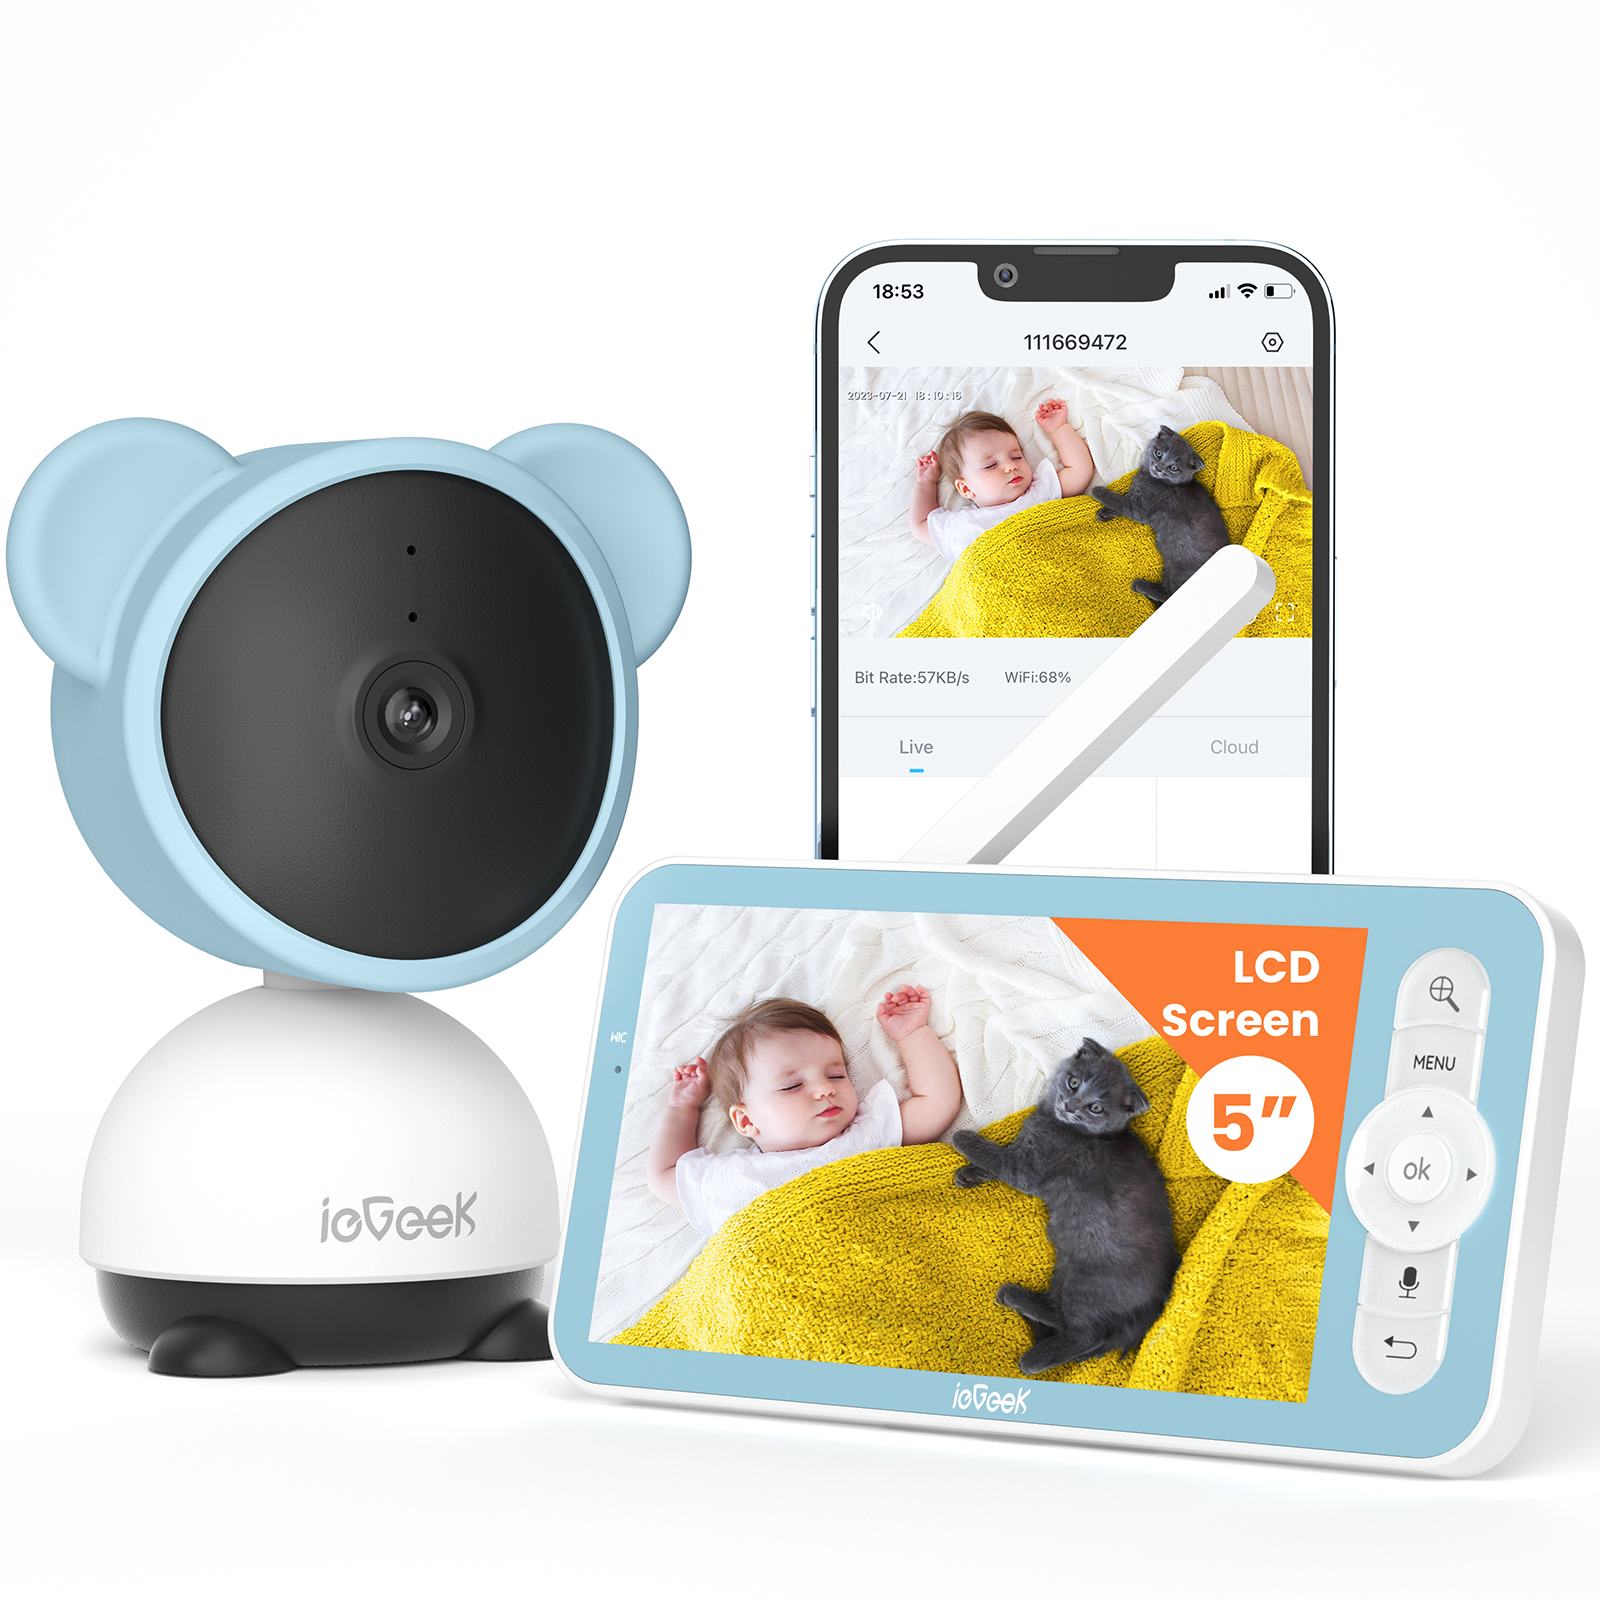 BOIFUN Baby Monitor with Remote Pan-Tilt-Zoom, 1080P, Cry and